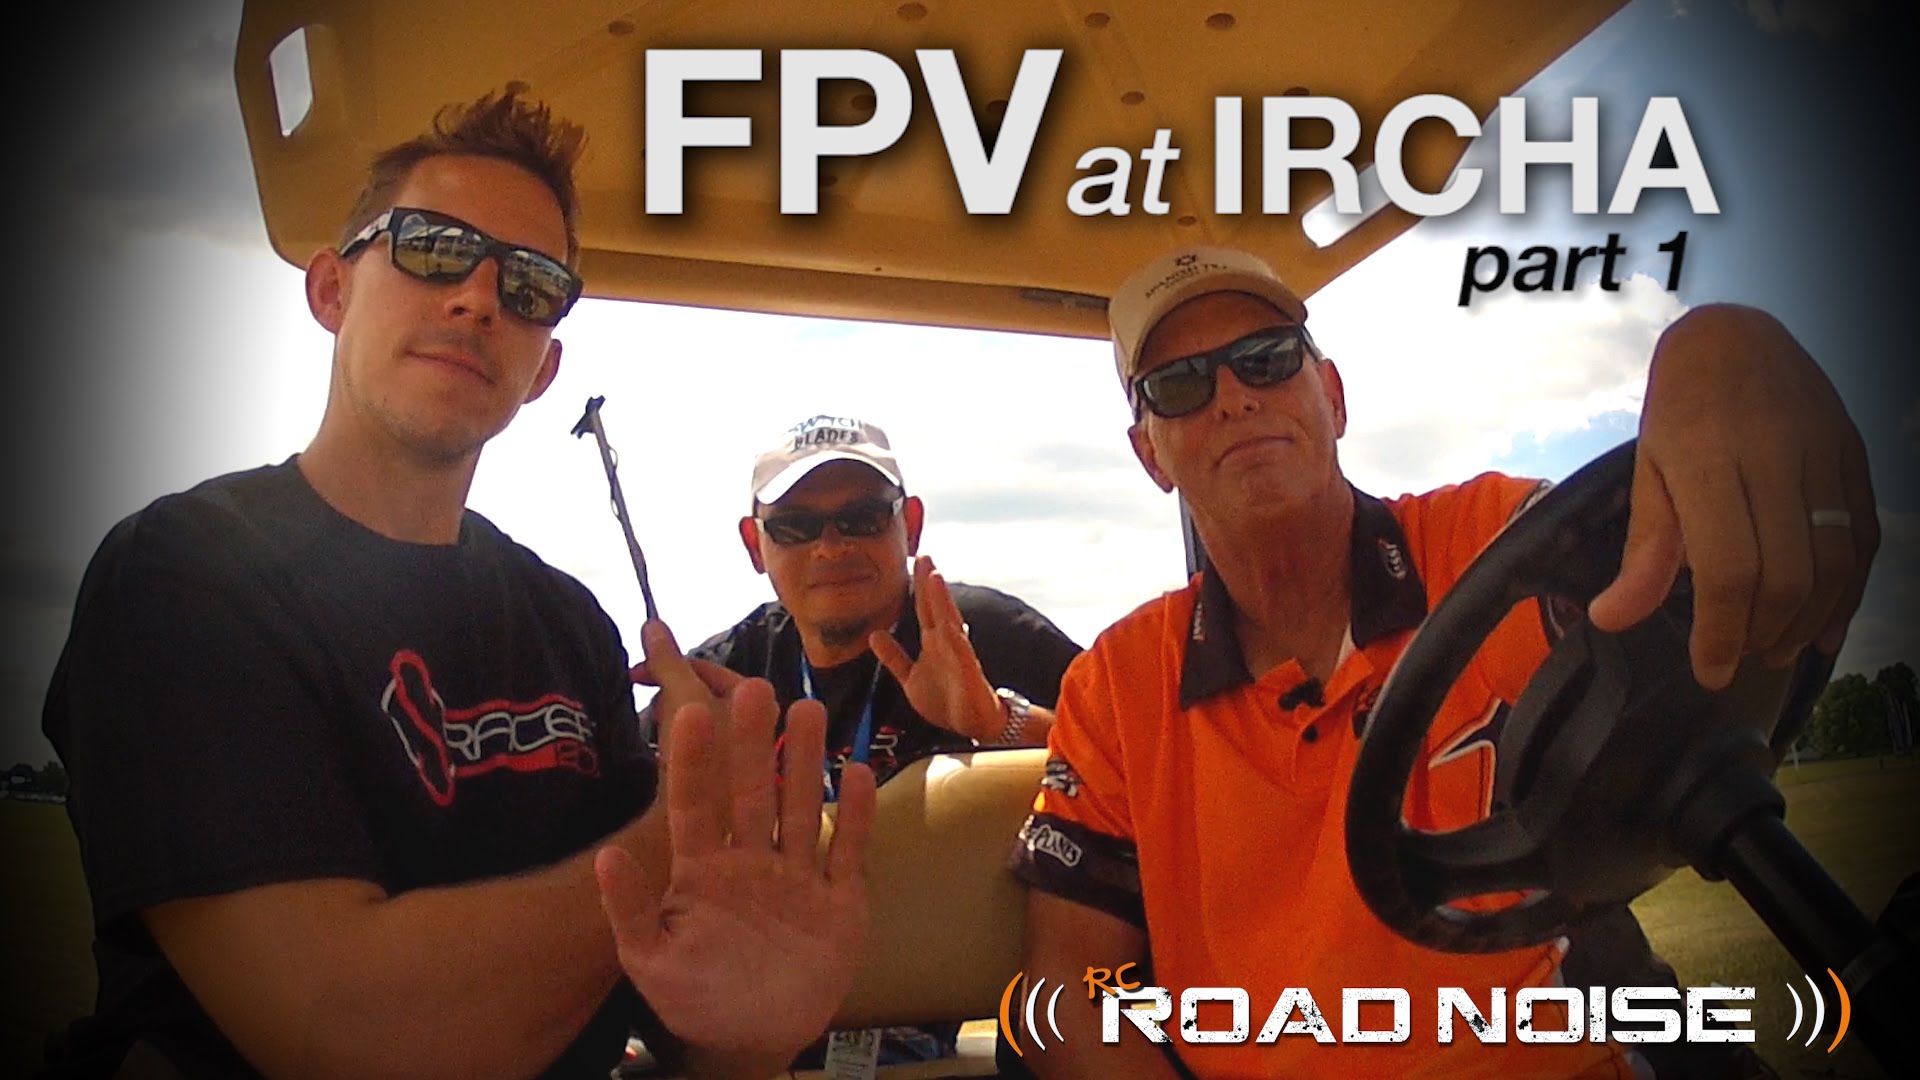 Drone FPV Racing at IRCHA Part 1 : Road Noise